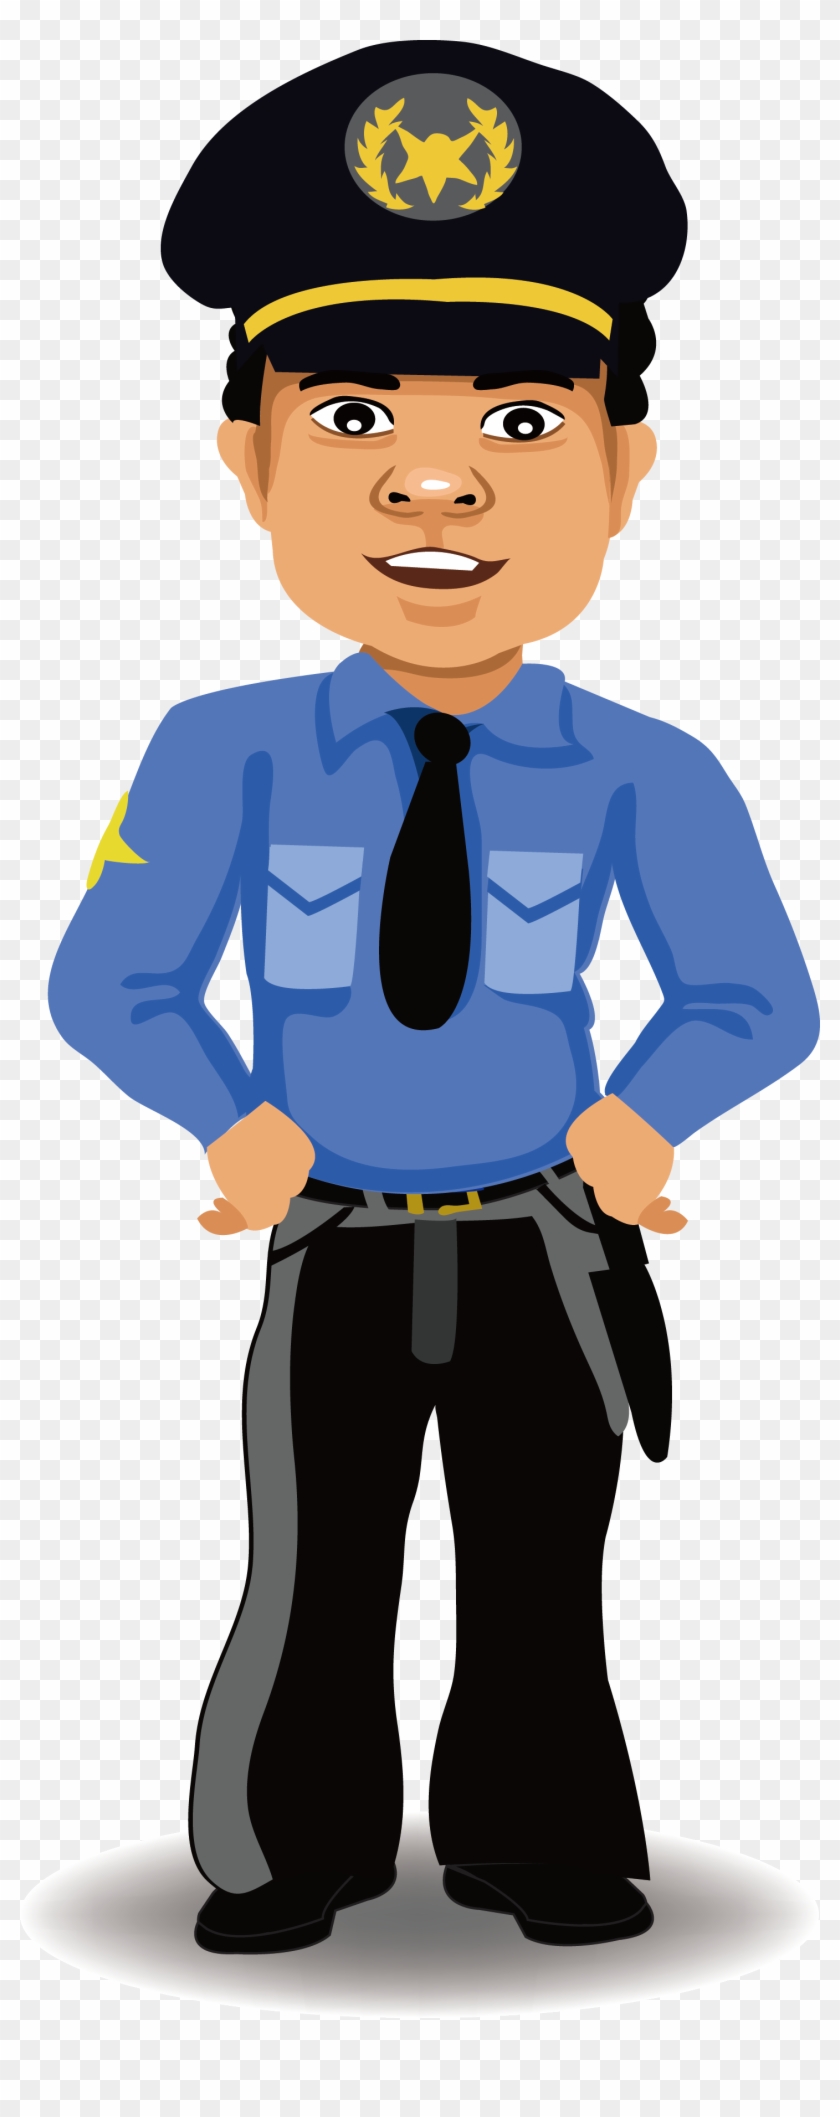 Police Officer Cartoon Security - Police Officer Cartoon Png #447422